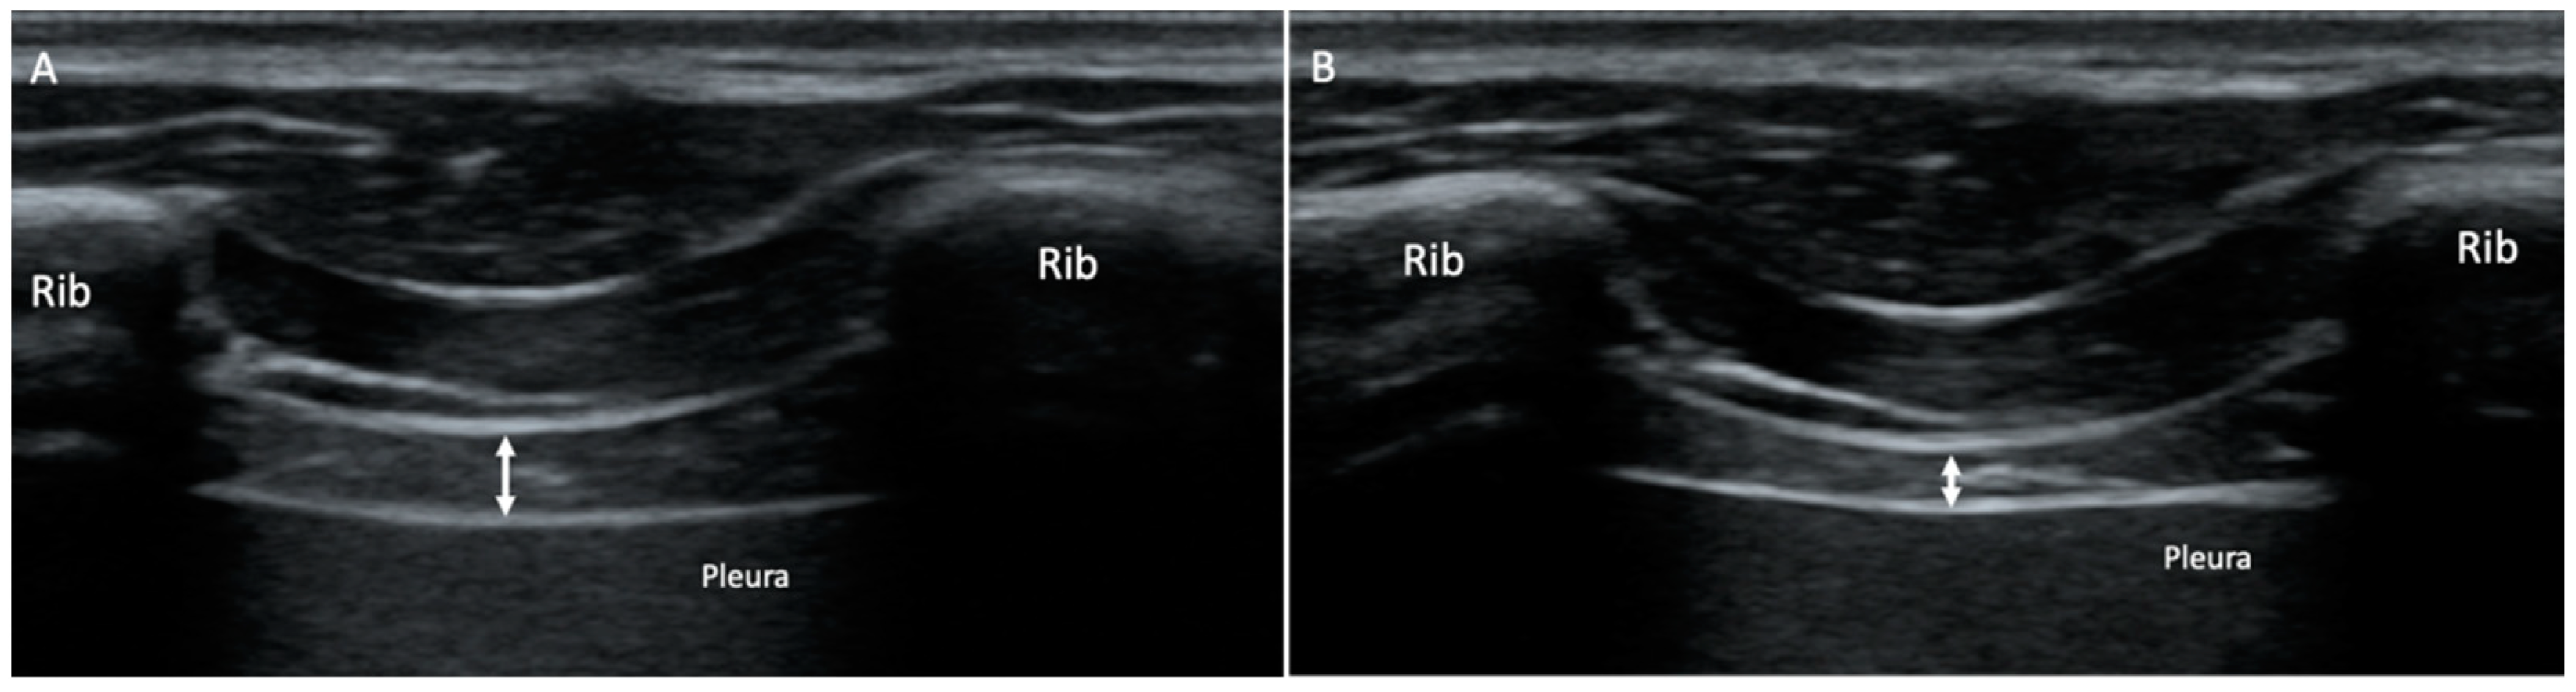 JCM Free Full-Text Effectiveness of Ultrasonography Visual Biofeedback of the Diaphragm in Conjunction with Inspiratory Muscle Training on Muscle Thickness, Respiratory Pressures, Pain, Disability, Quality of Life and Pulmonary Function